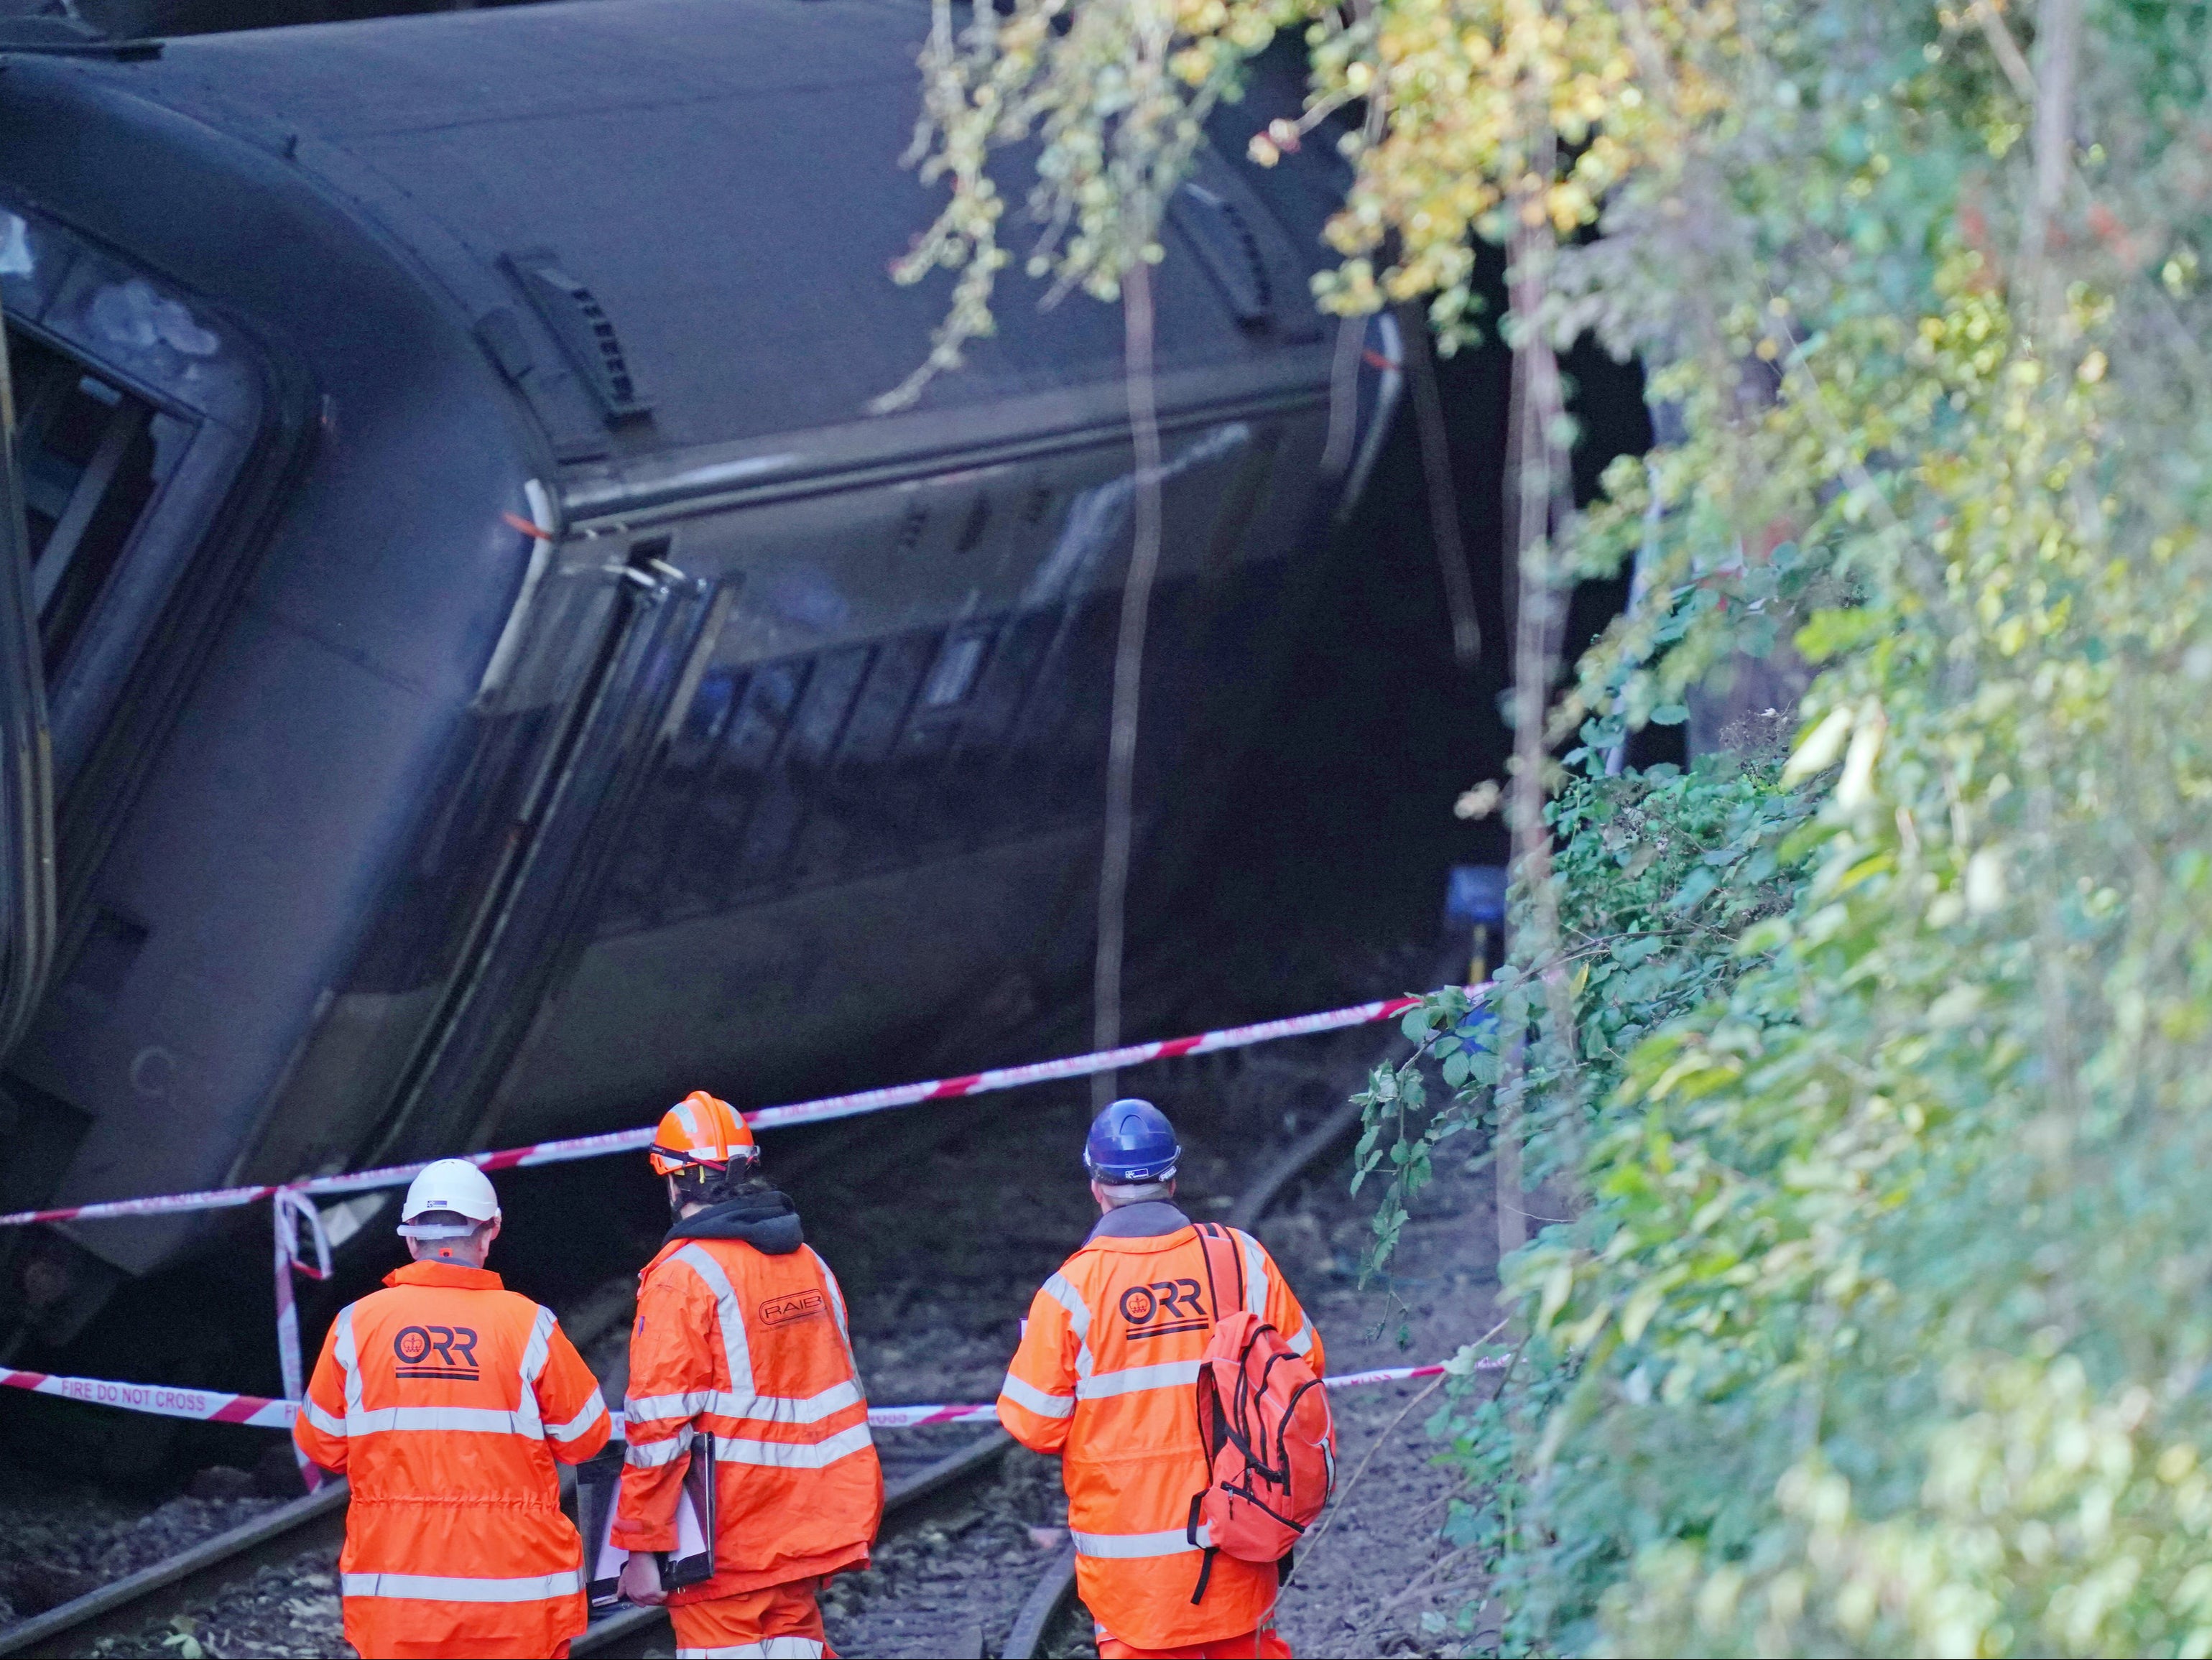 Two trains collided in a tunnel in Salisbury on Sunday evening